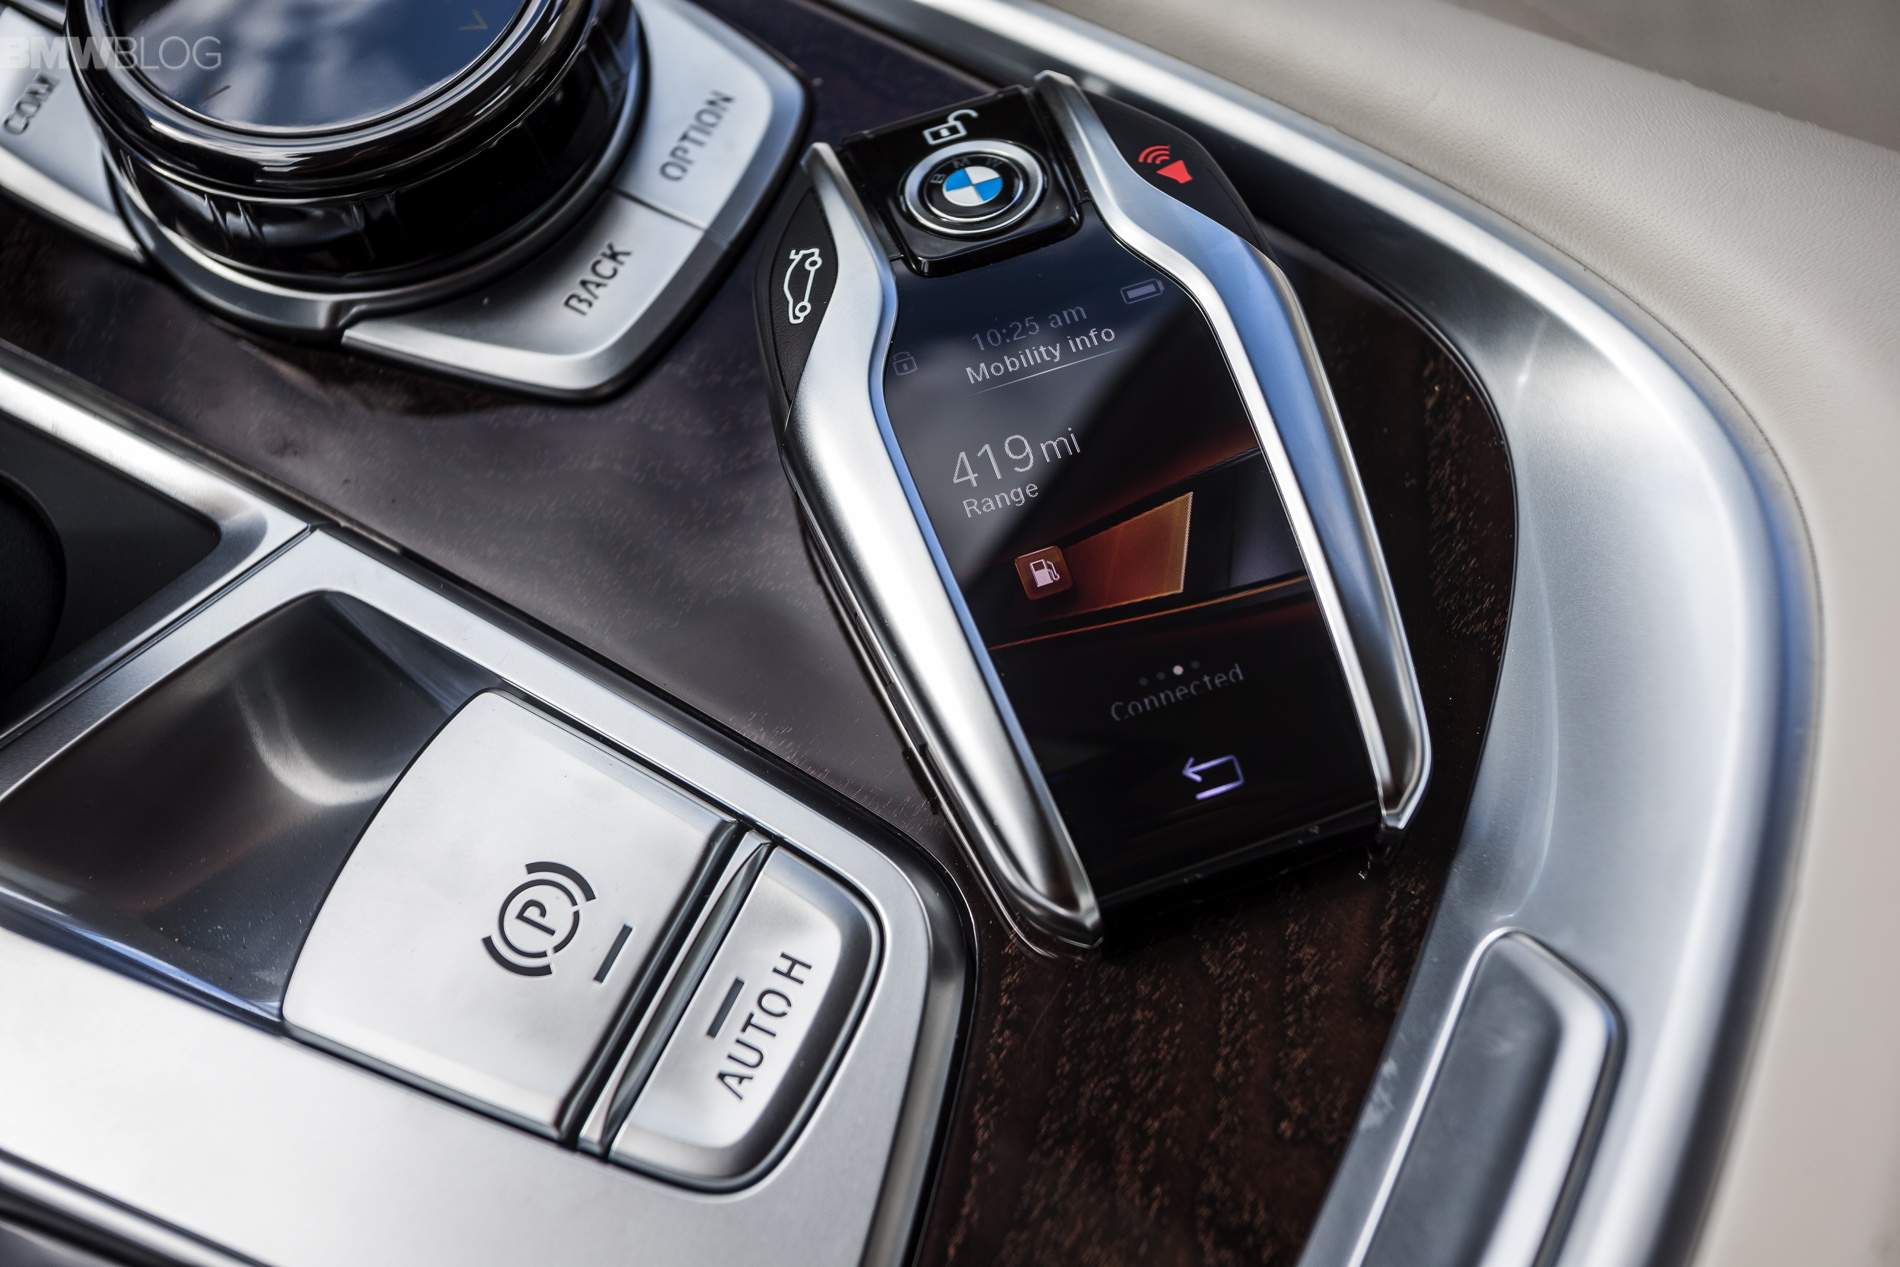 For $250 you can have the high-tech BMW keyfob